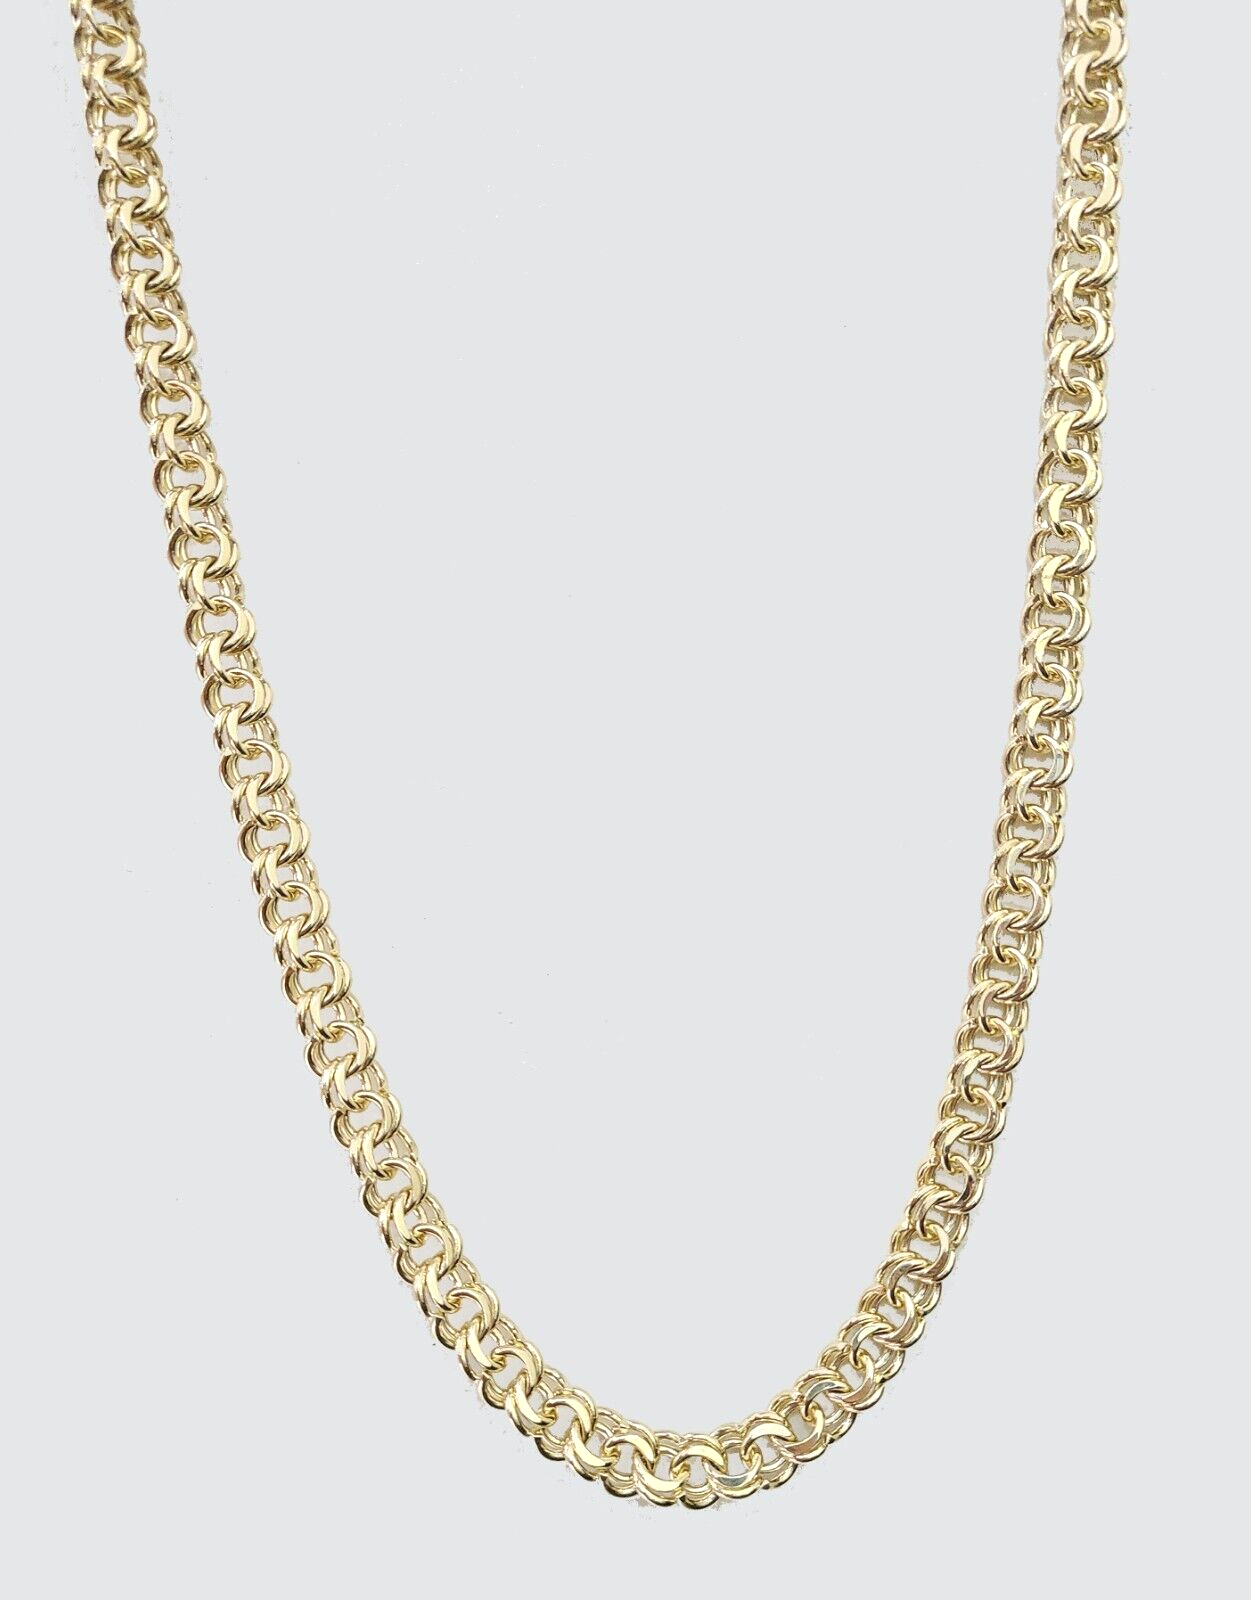 Real 10k Yellow Gold Necklace 12mm Chino Chain 26'' Inches Unisex